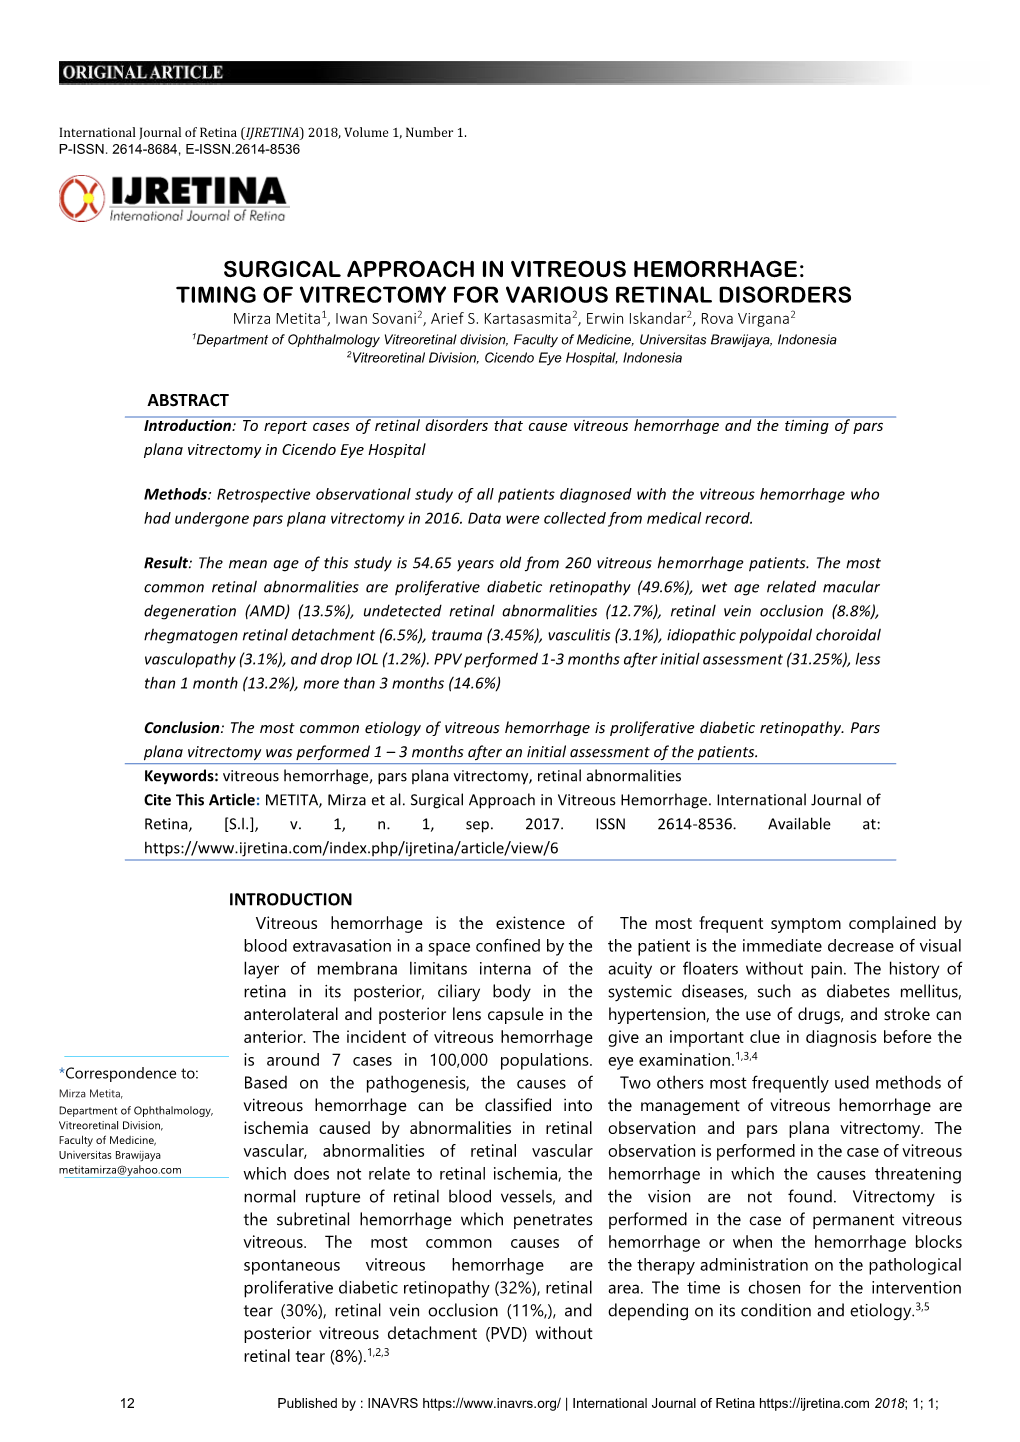 SURGICAL APPROACH in VITREOUS HEMORRHAGE: TIMING of VITRECTOMY for VARIOUS RETINAL DISORDERS Mirza Metita1, Iwan Sovani2, Arief S